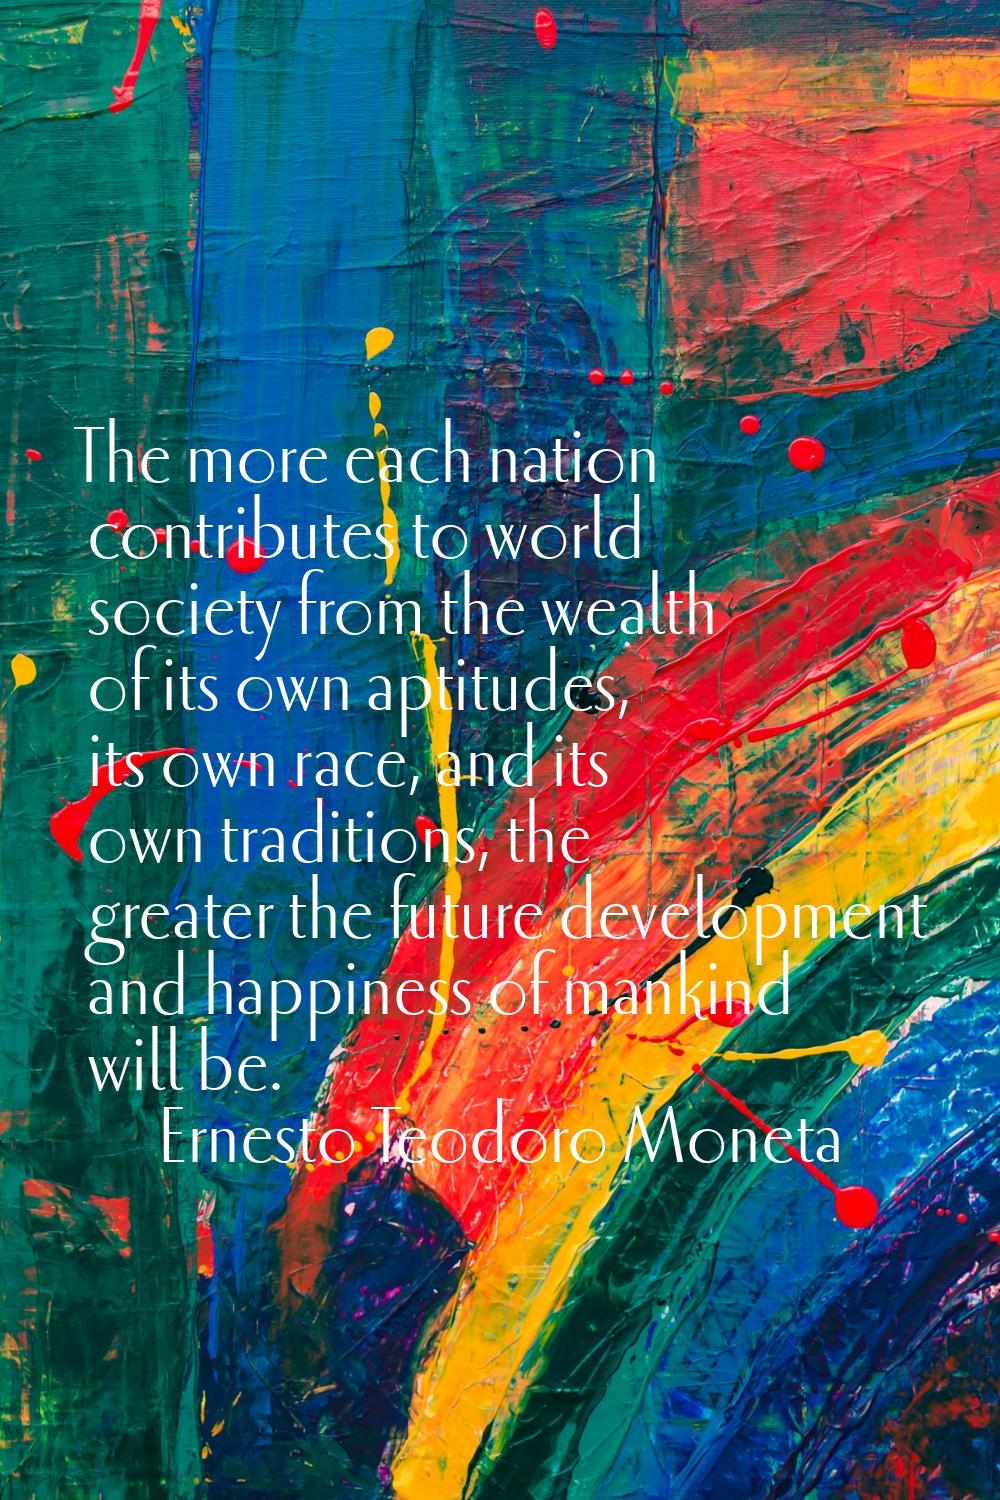 The more each nation contributes to world society from the wealth of its own aptitudes, its own rac